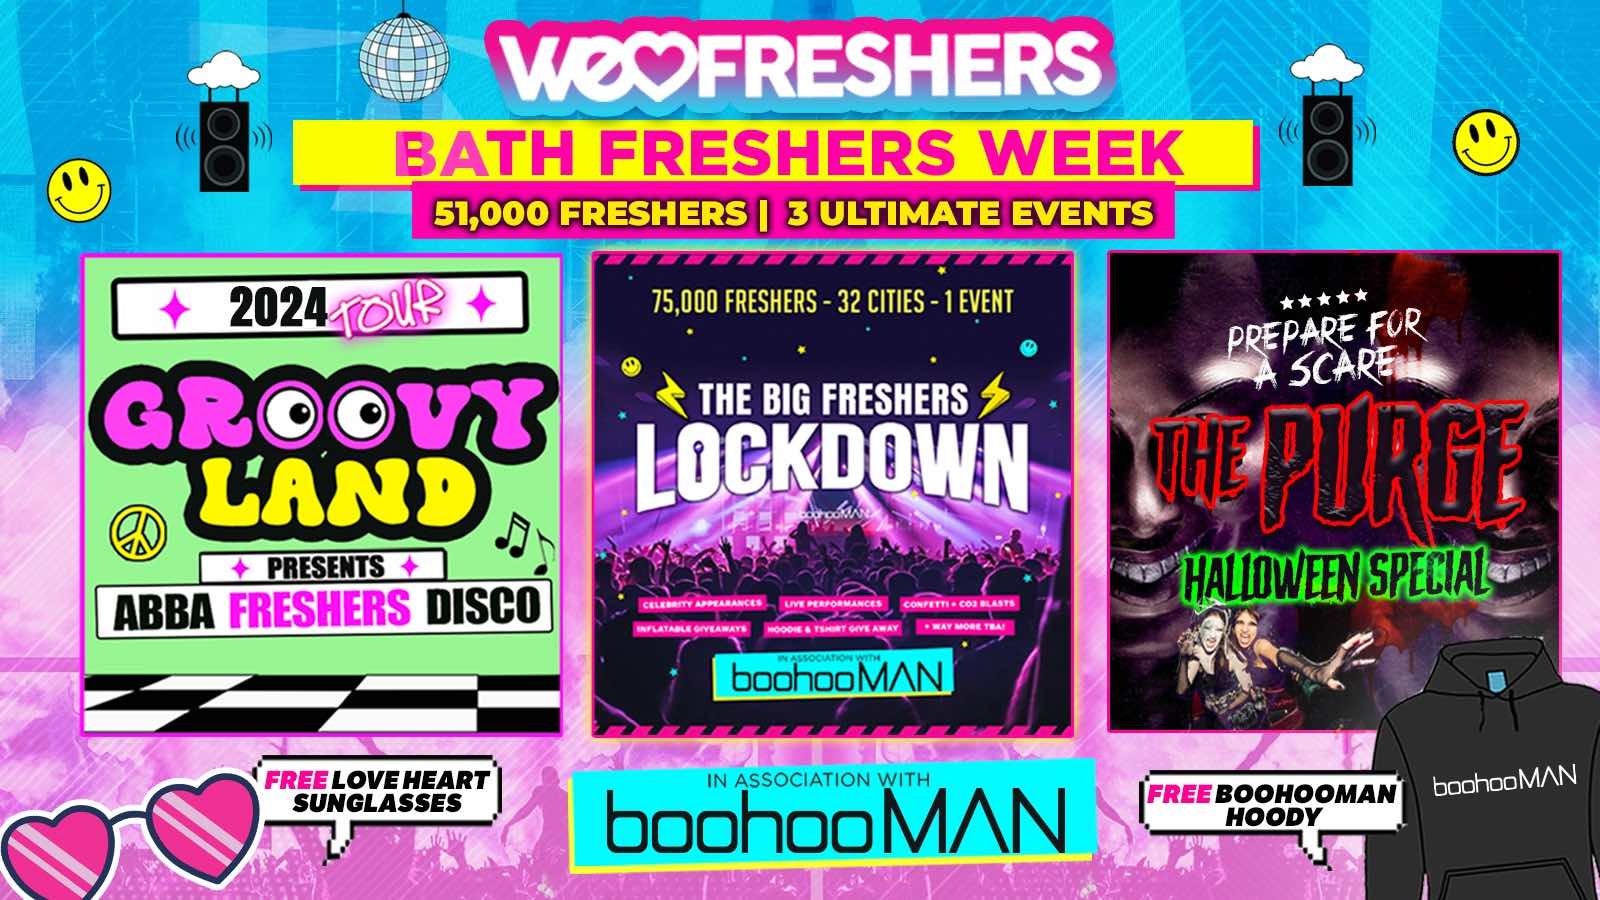 WE LOVE BATH FRESHERS 2024 in association with boohooMAN  – 3 EVENTS❗